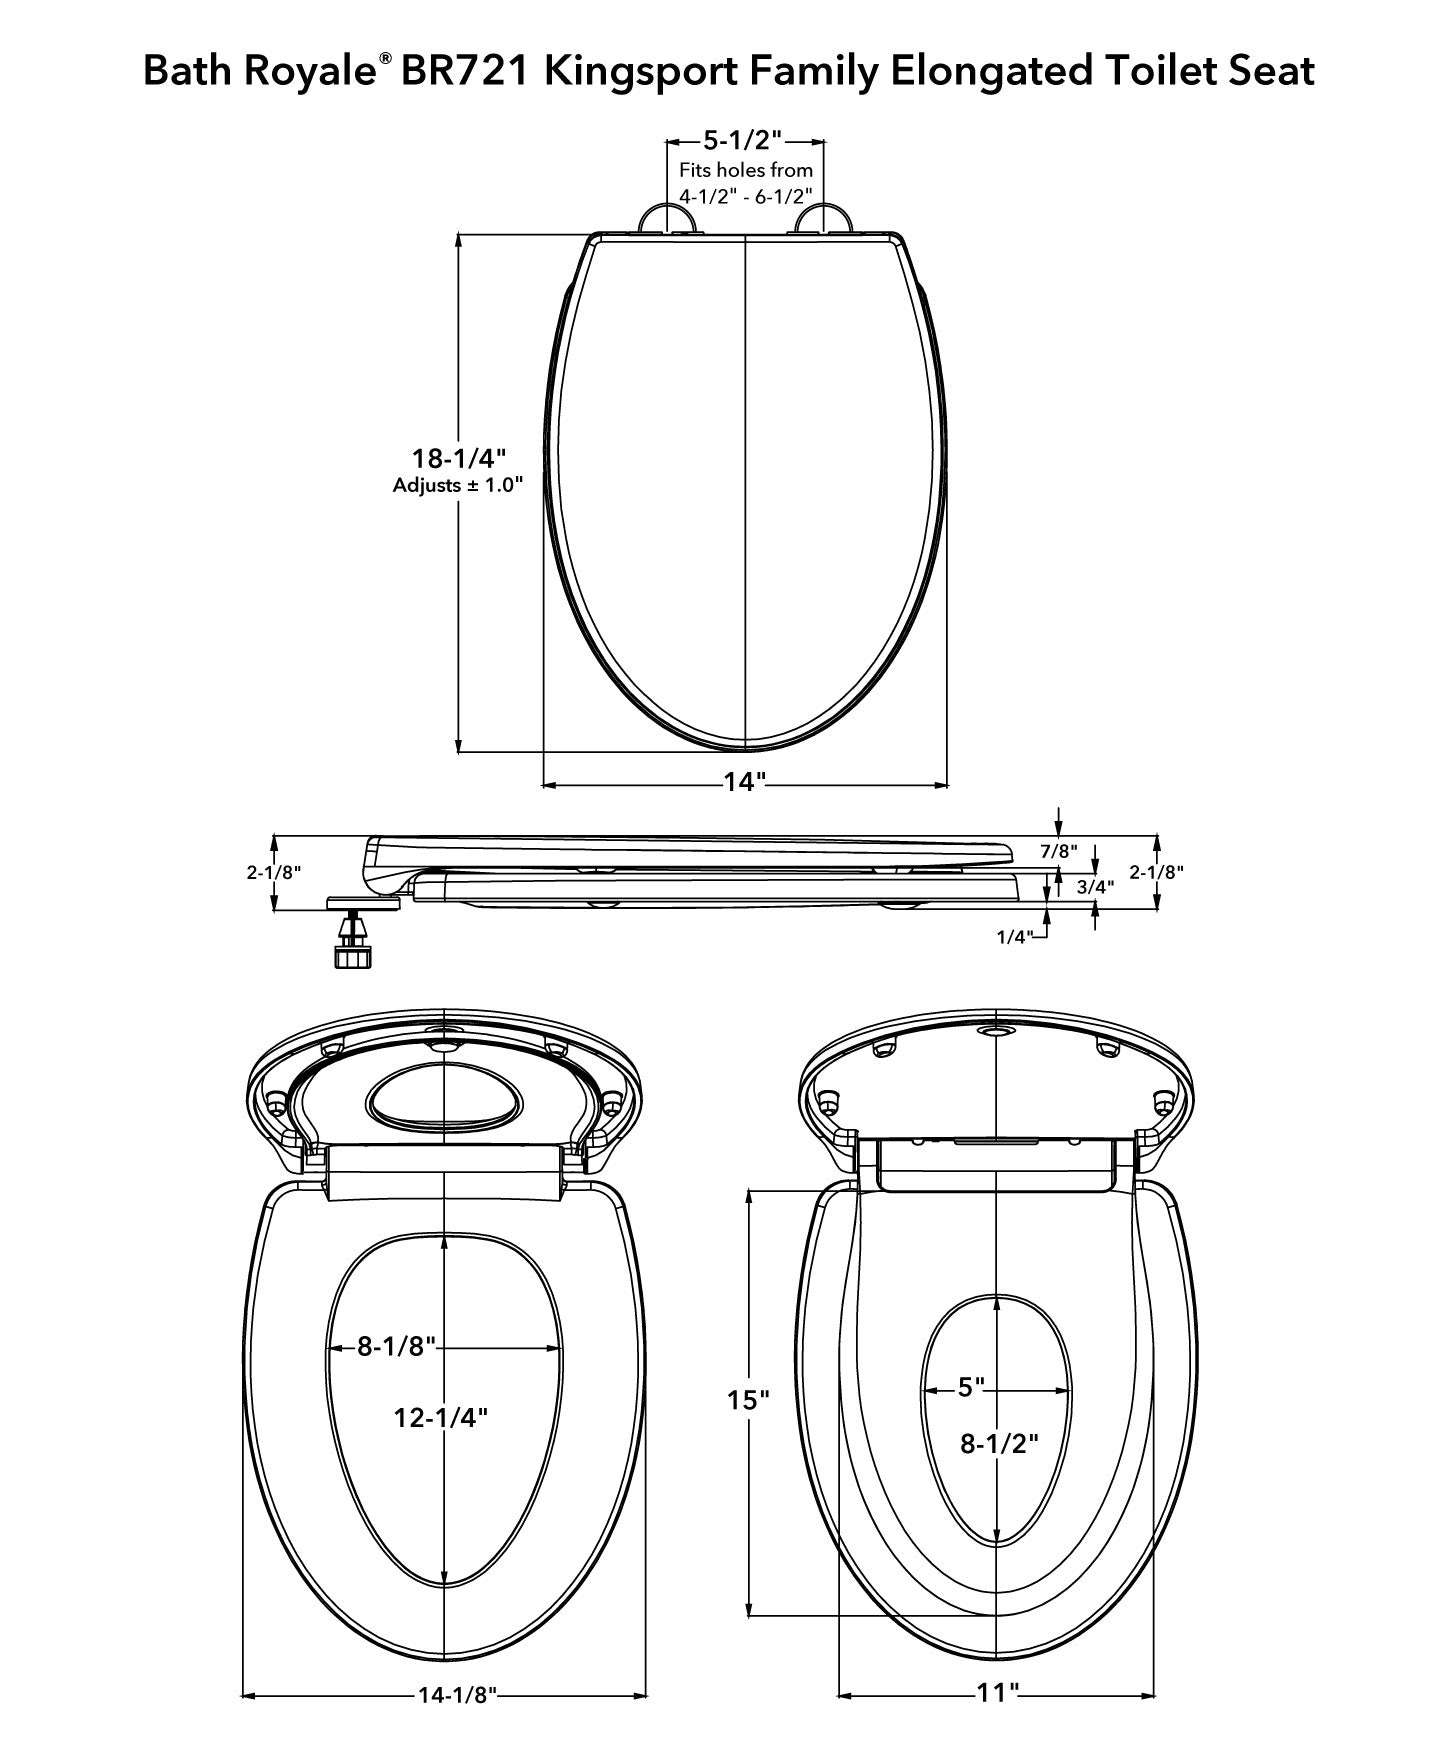 Dimensions of Elongated Kingsport Family Toilet Seat with Built-In Child Seat